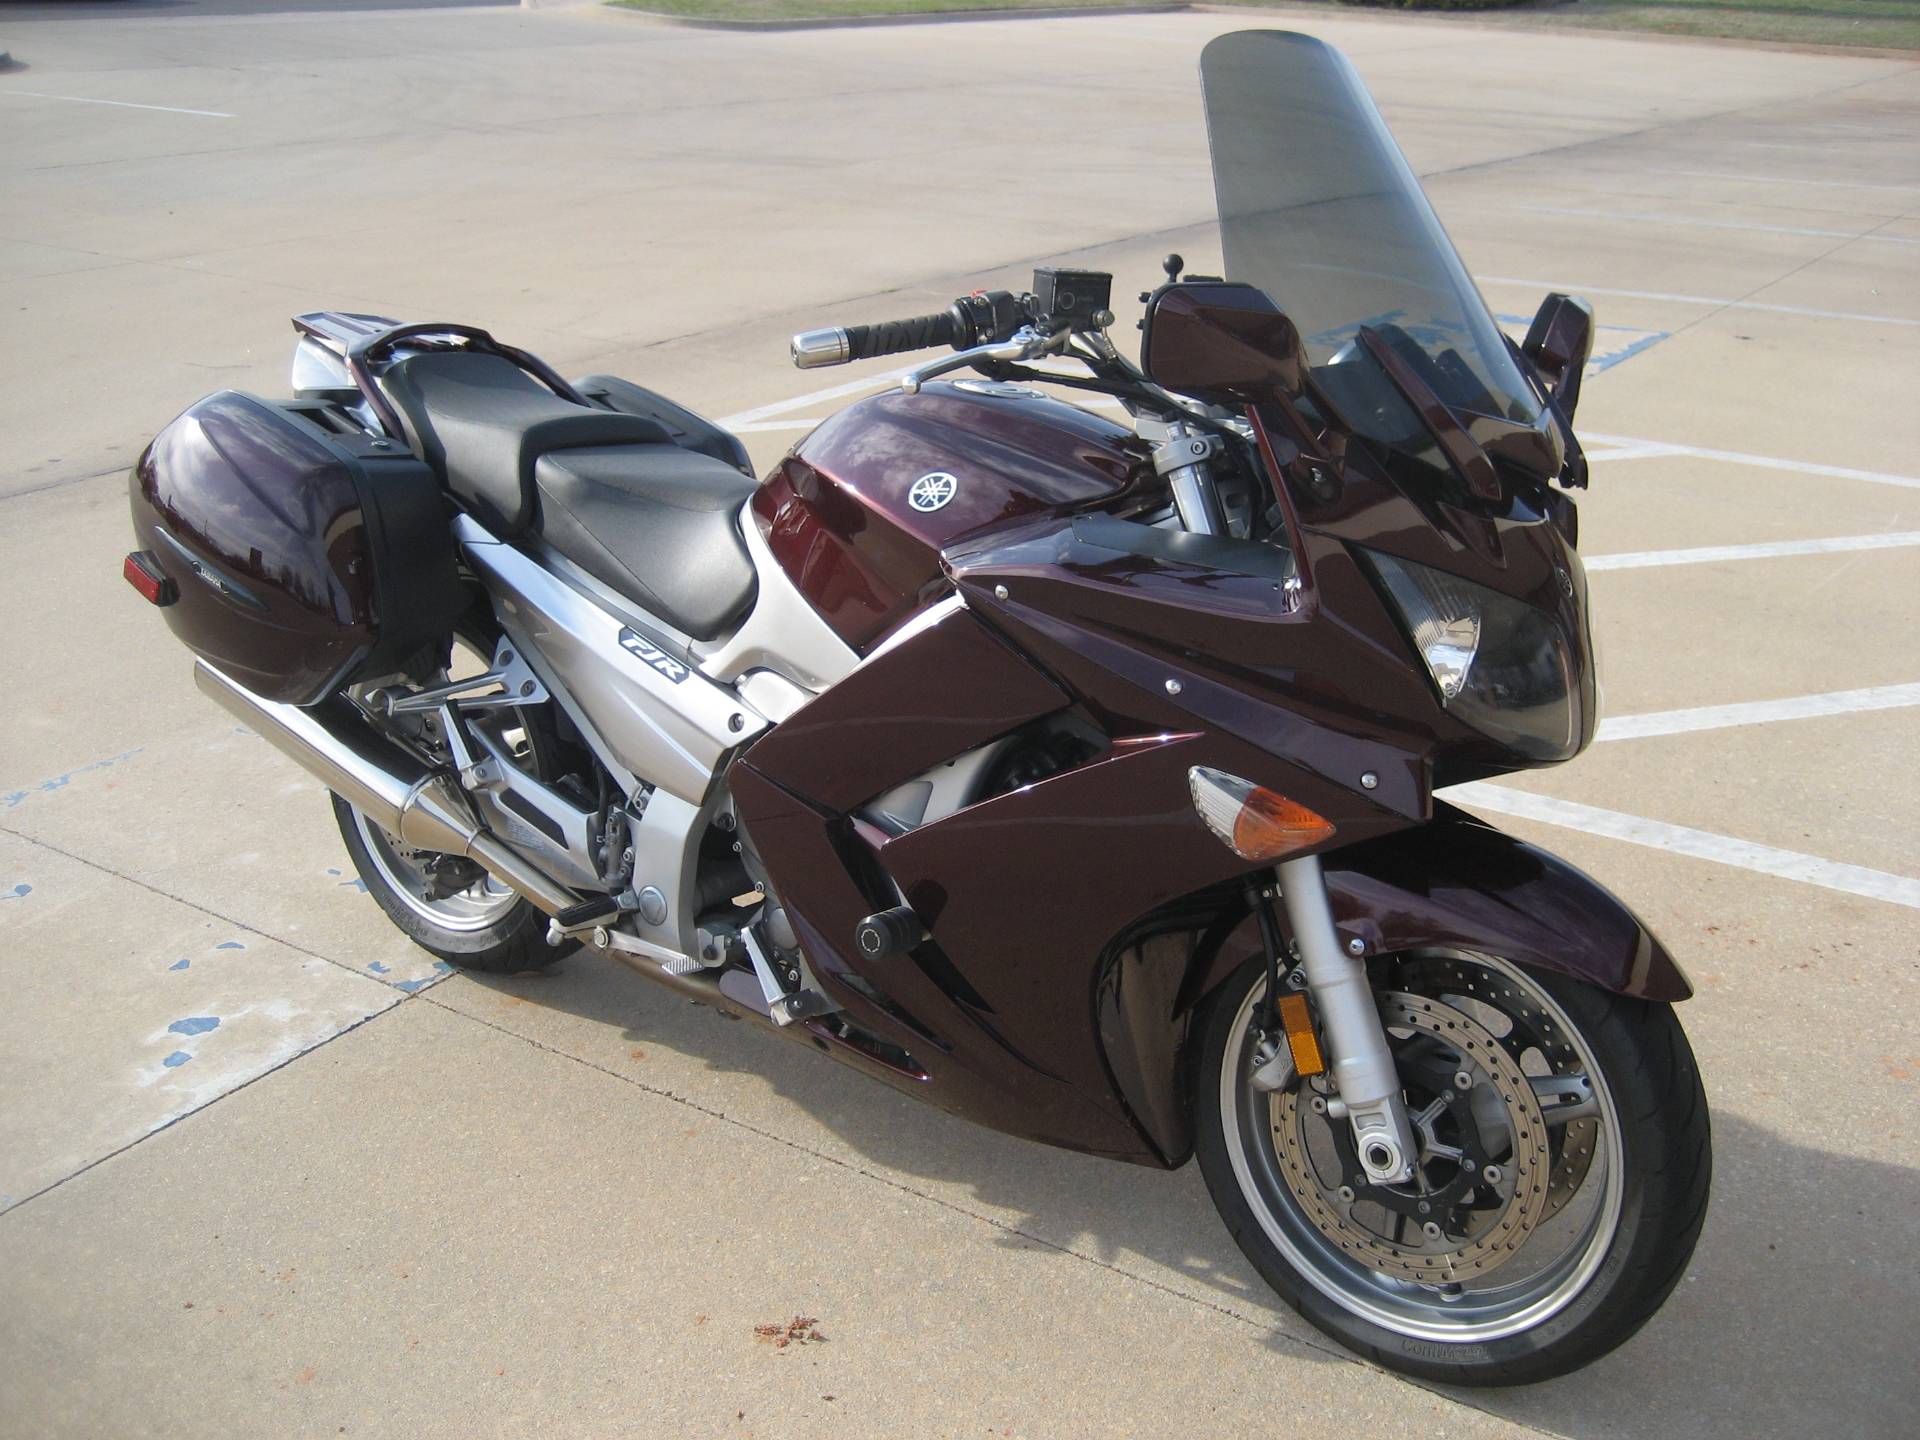 Used 2007 Yamaha FJR 1300A Motorcycles In Shawnee, OK. Stock Number: N A